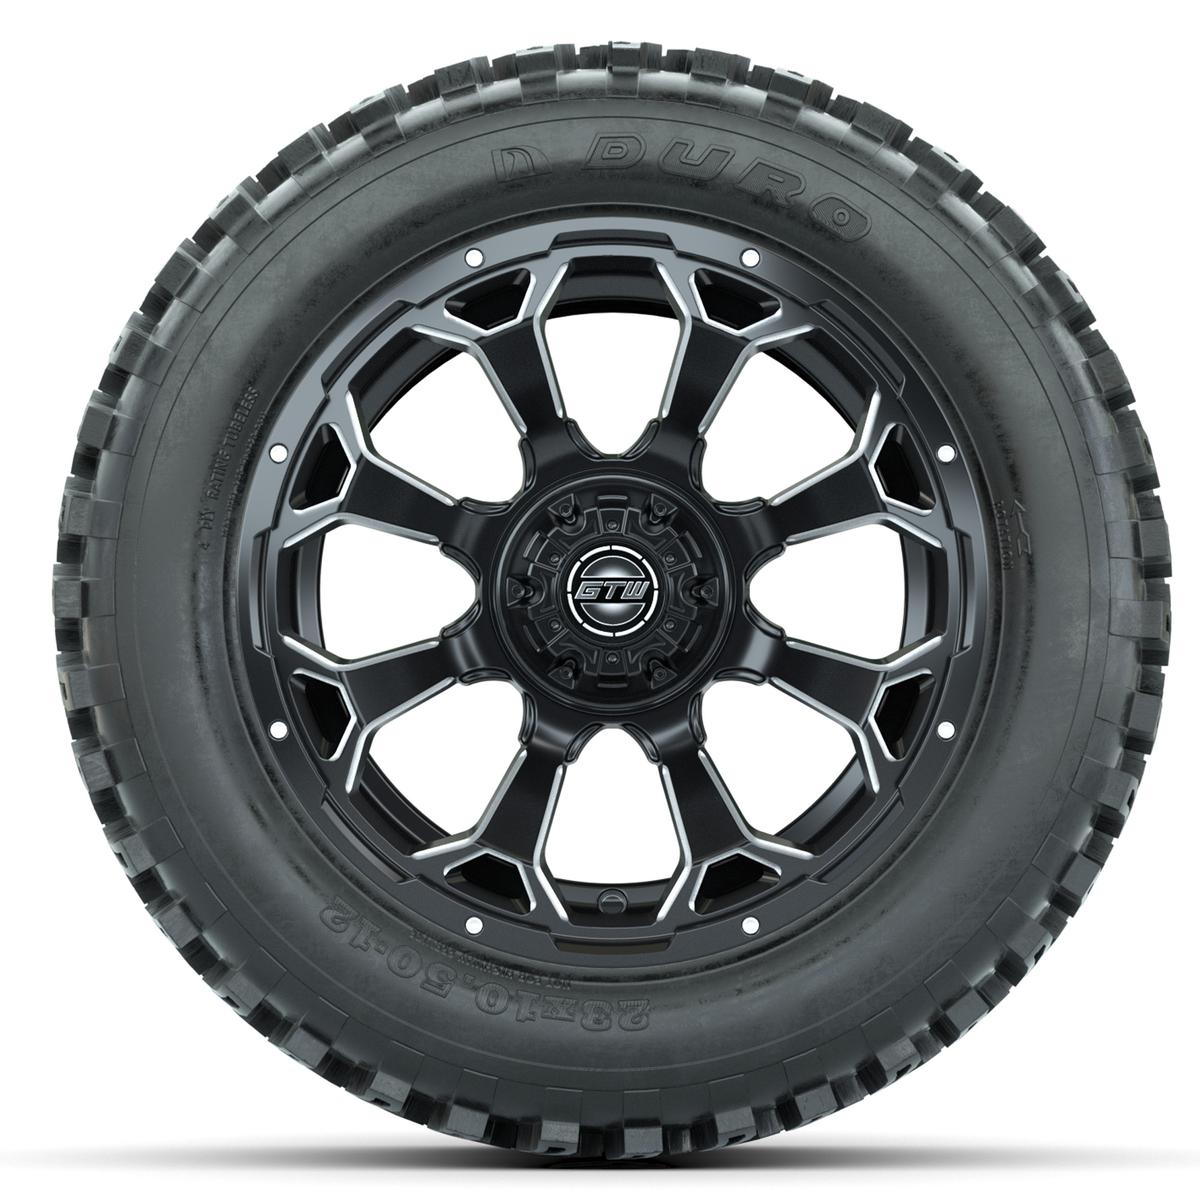 Set of (4) 14 in GTW Raven Wheels with 23x10-14 Duro Desert All-Terrain Tires